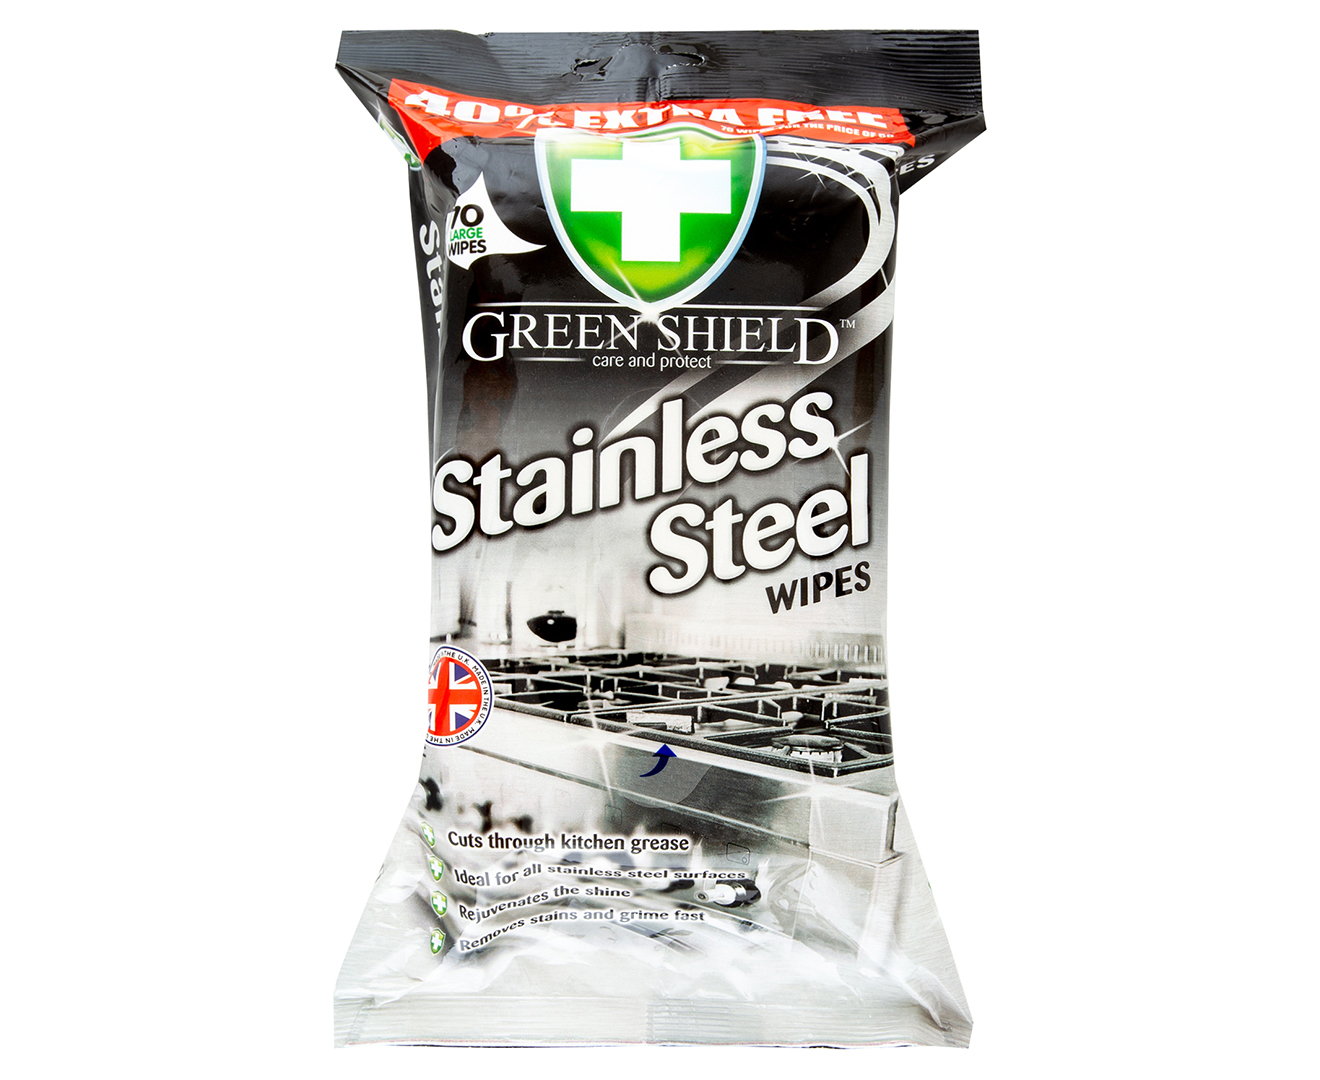 Green Shield Stainless Steel Wipes, 70 Extra Large Sheets - Wilsons -  Import, distribution and wholesale of branded household, hardware and DIY  products